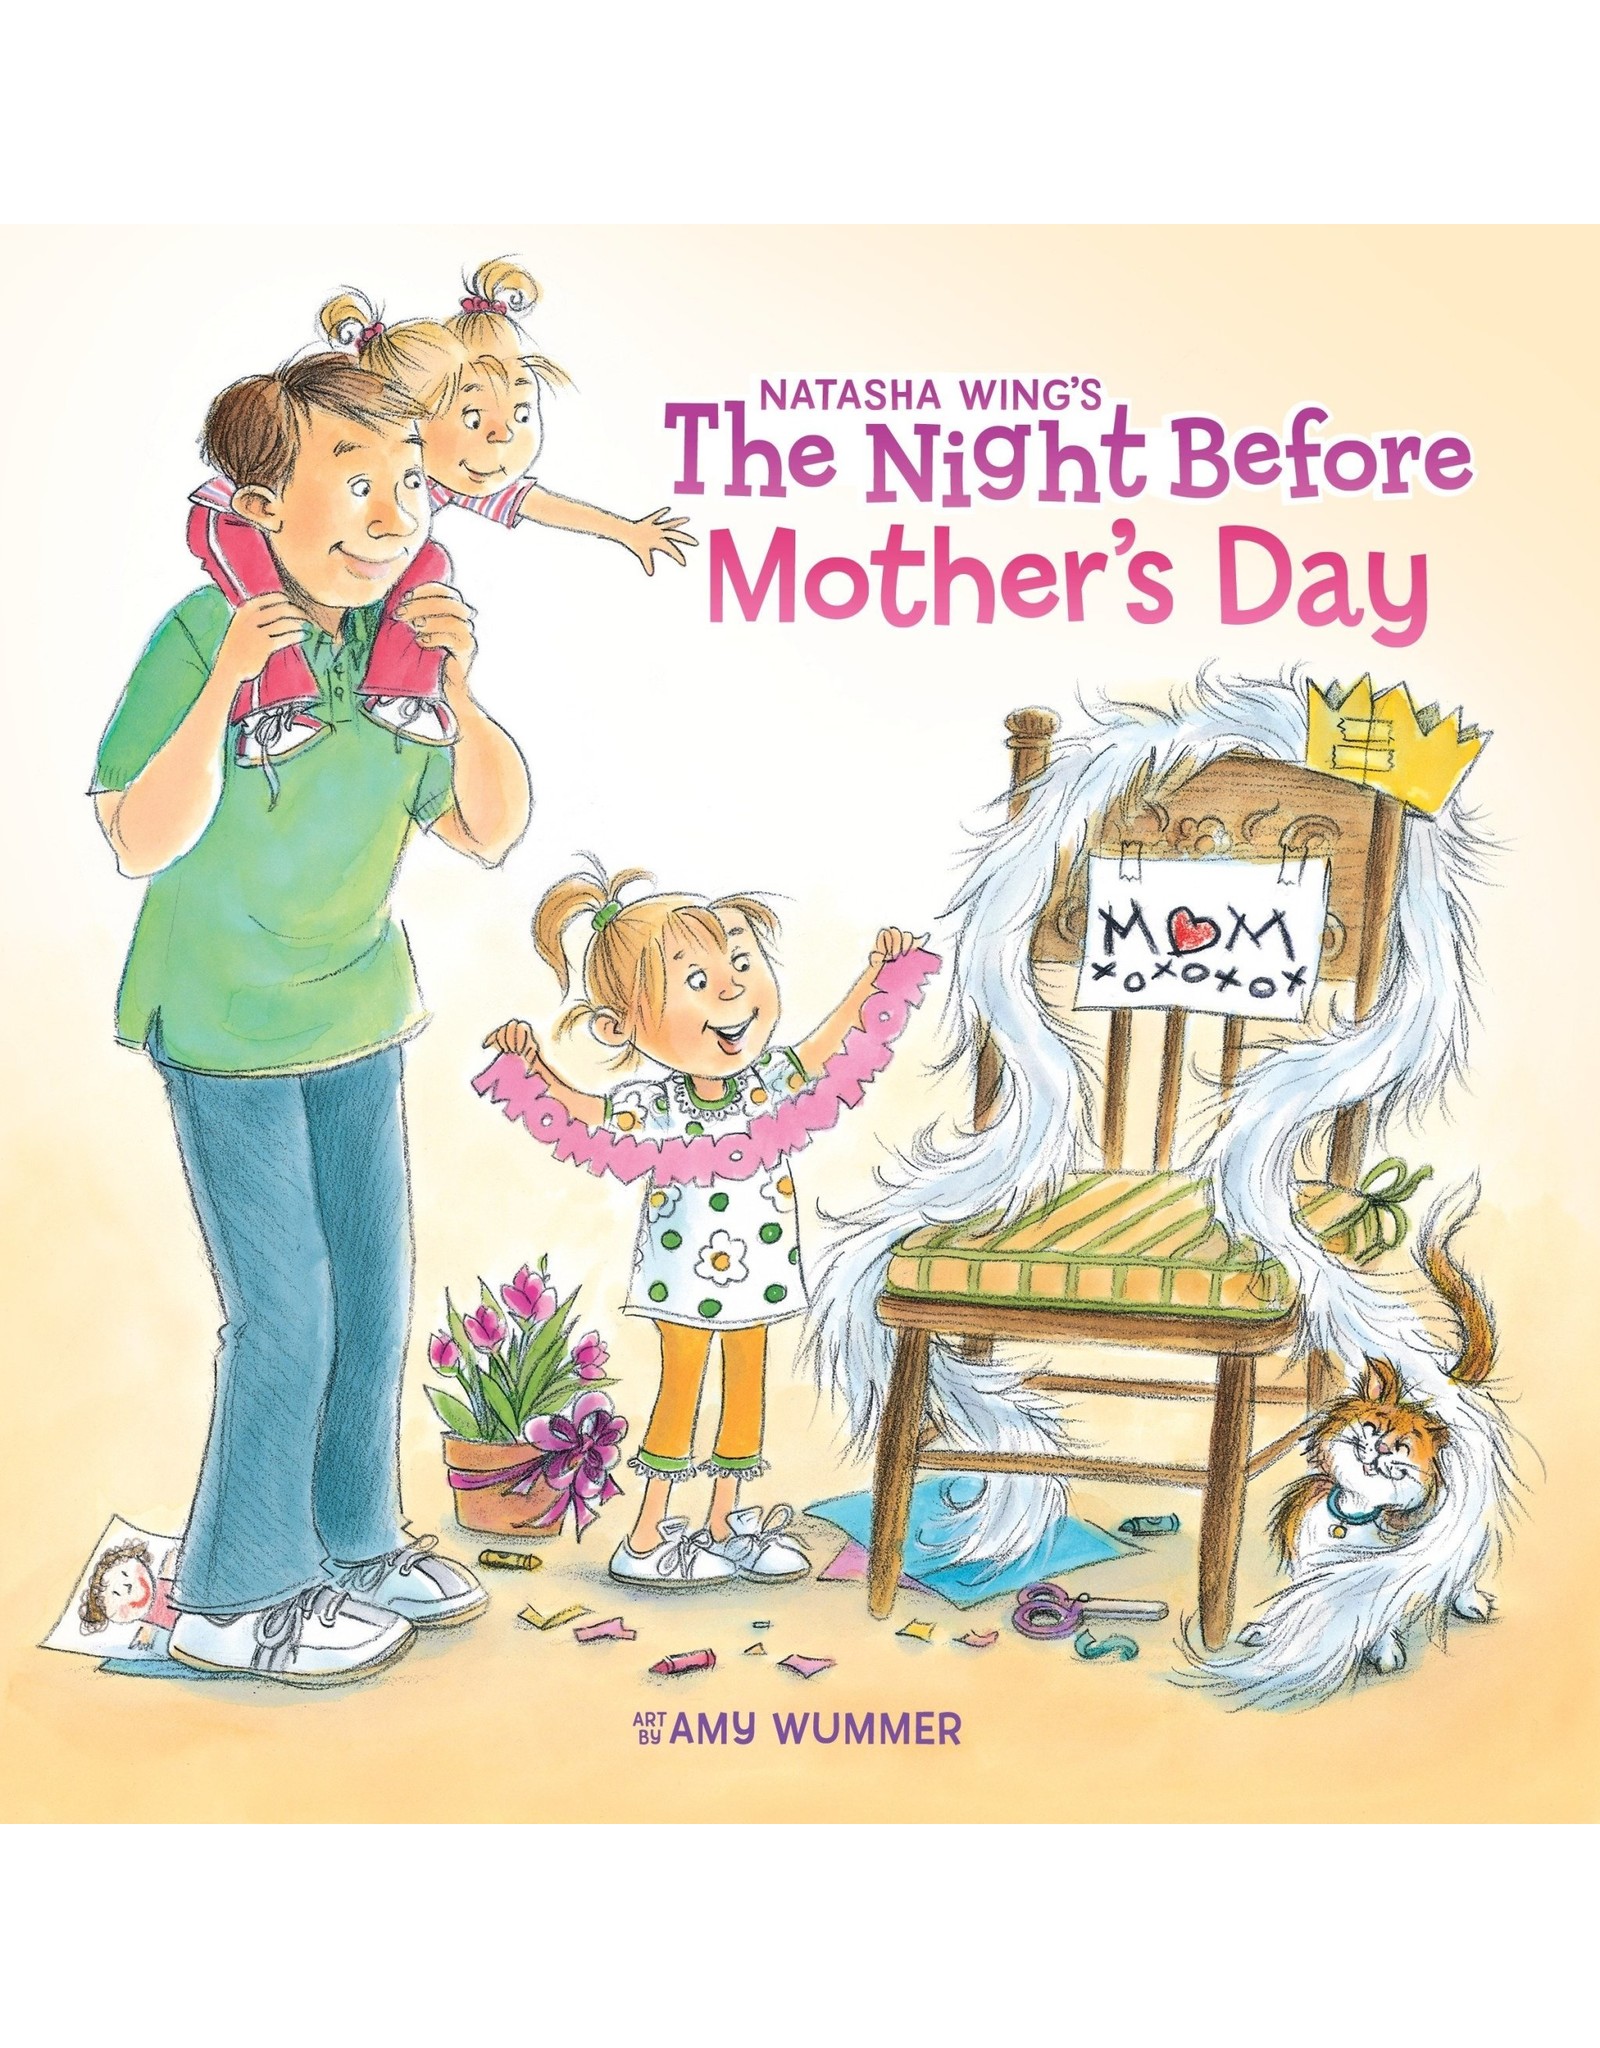 The Night Before Mother's Day